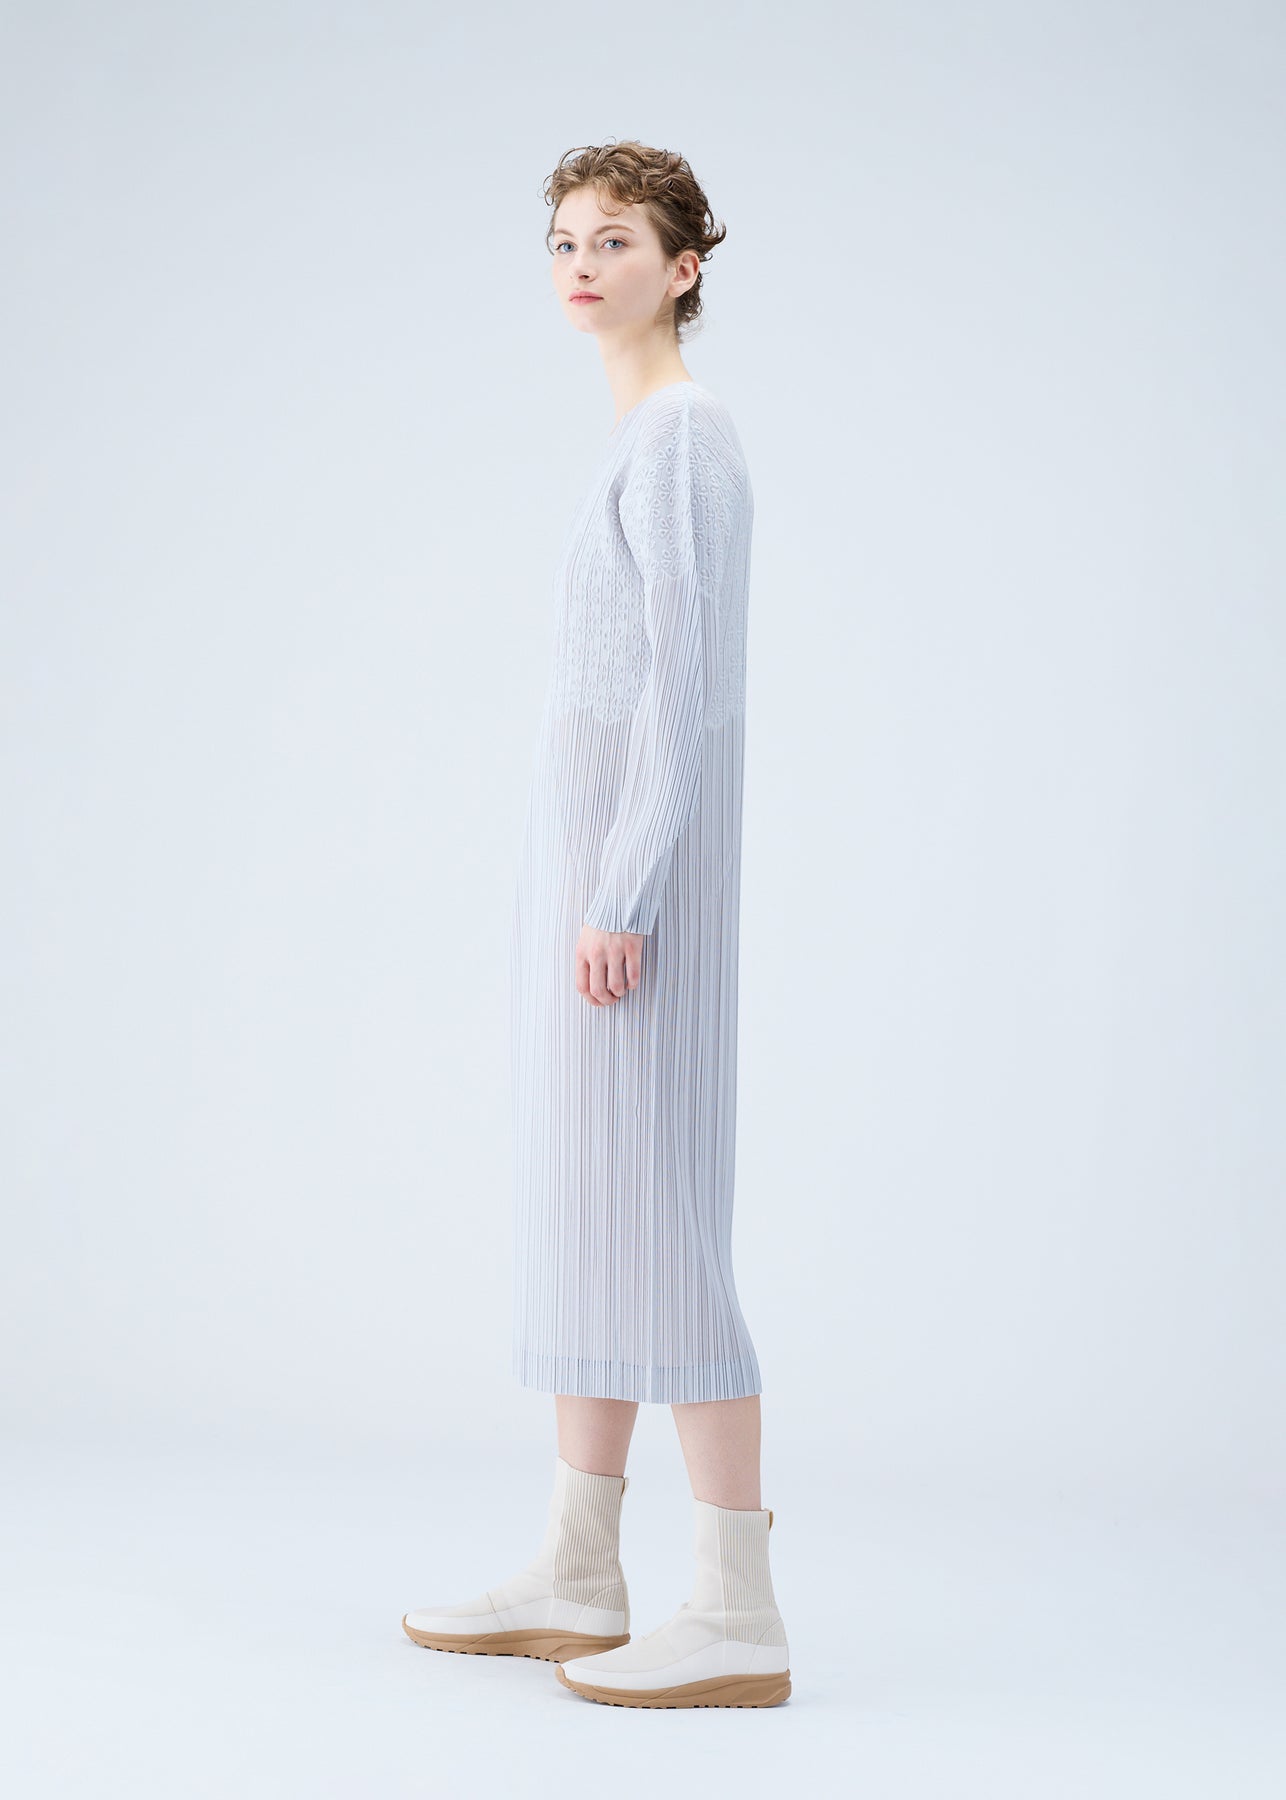 SNOWDROP DRESS | The official ISSEY MIYAKE ONLINE STORE | ISSEY